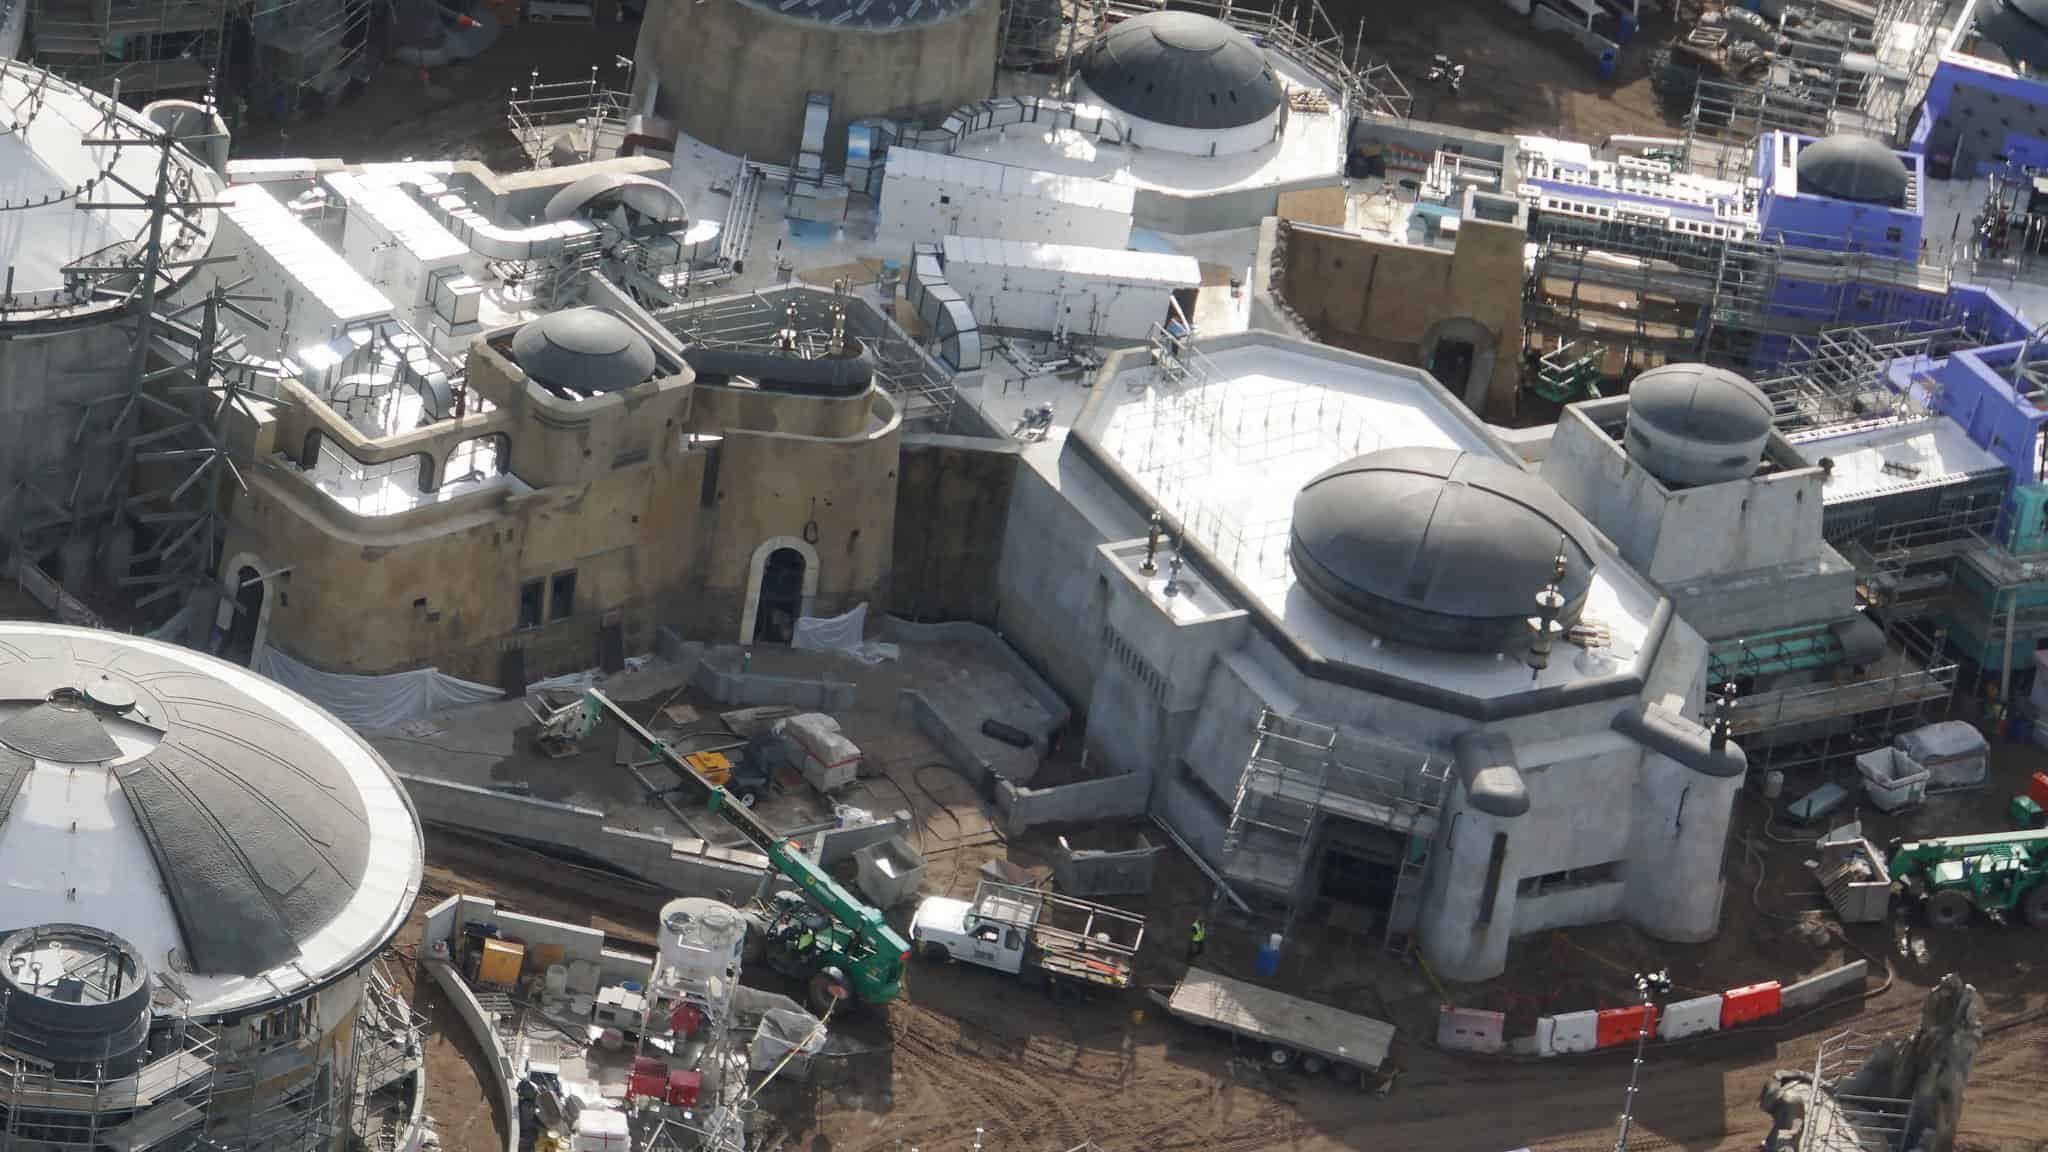 Galaxy's Edge Update February 2019 Black Spire Outpost buildings